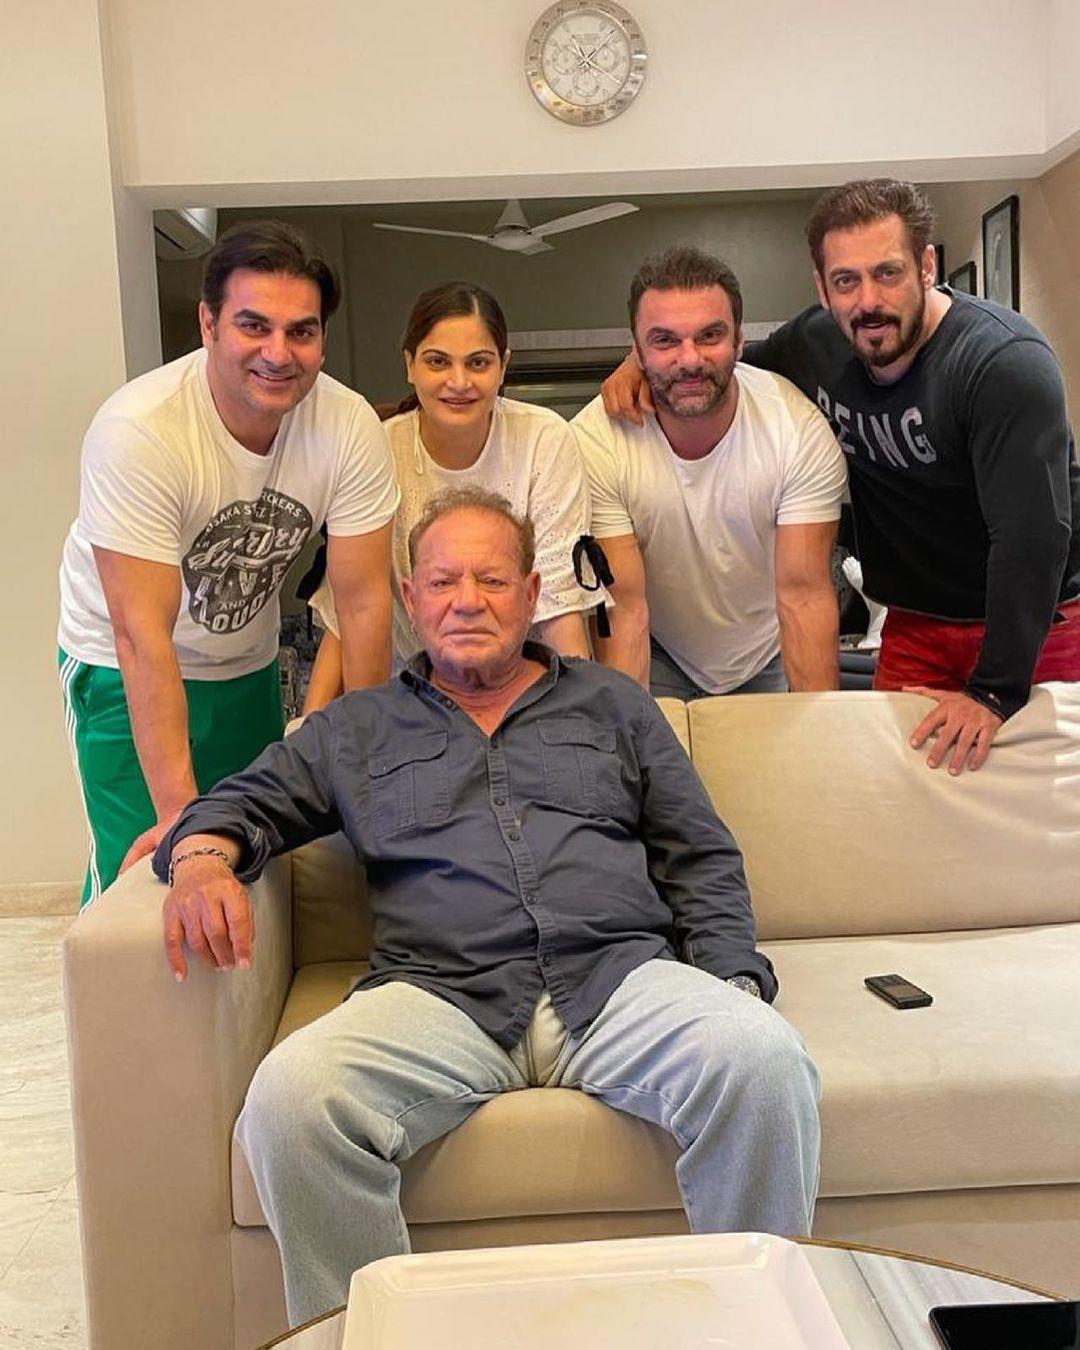 Interestingly, Salim Khan initially came to Mumbai with dreams of becoming an actor, but destiny had other plans for him, leading him to become a highly successful screenwriter instead.